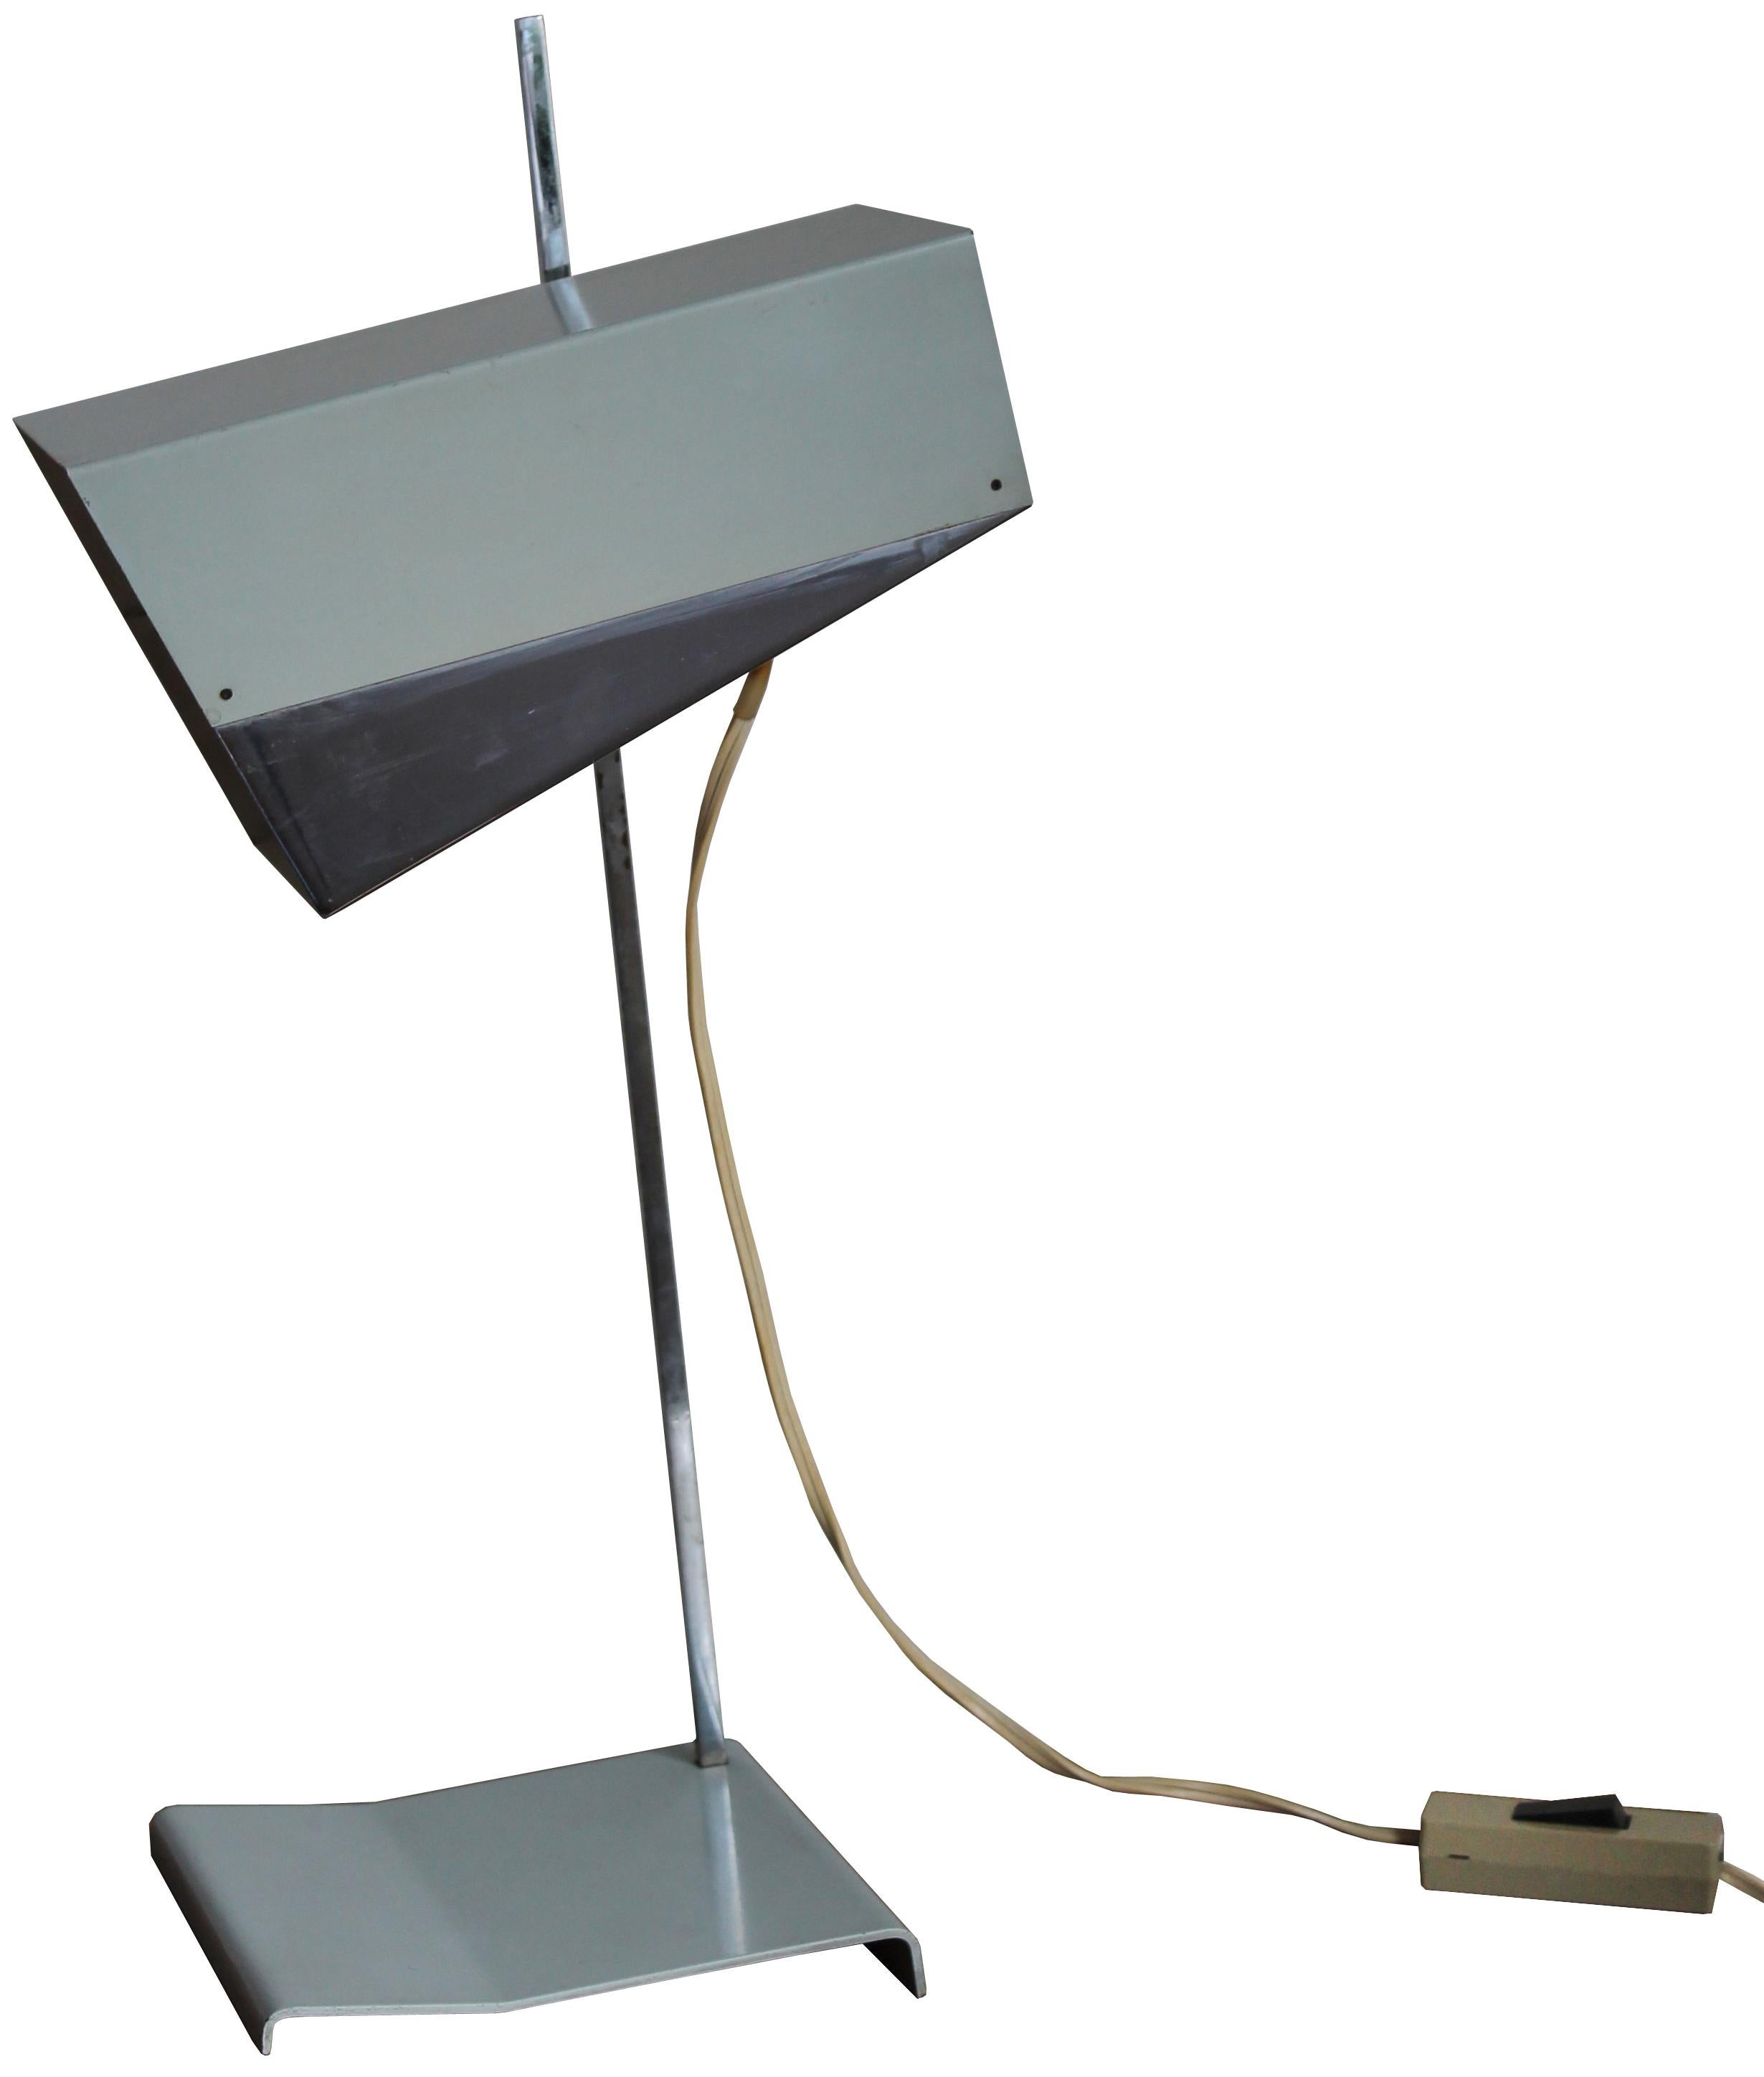 Late 20th Century Midcentury Desk Lamp by Josef Hurka for Napako For Sale